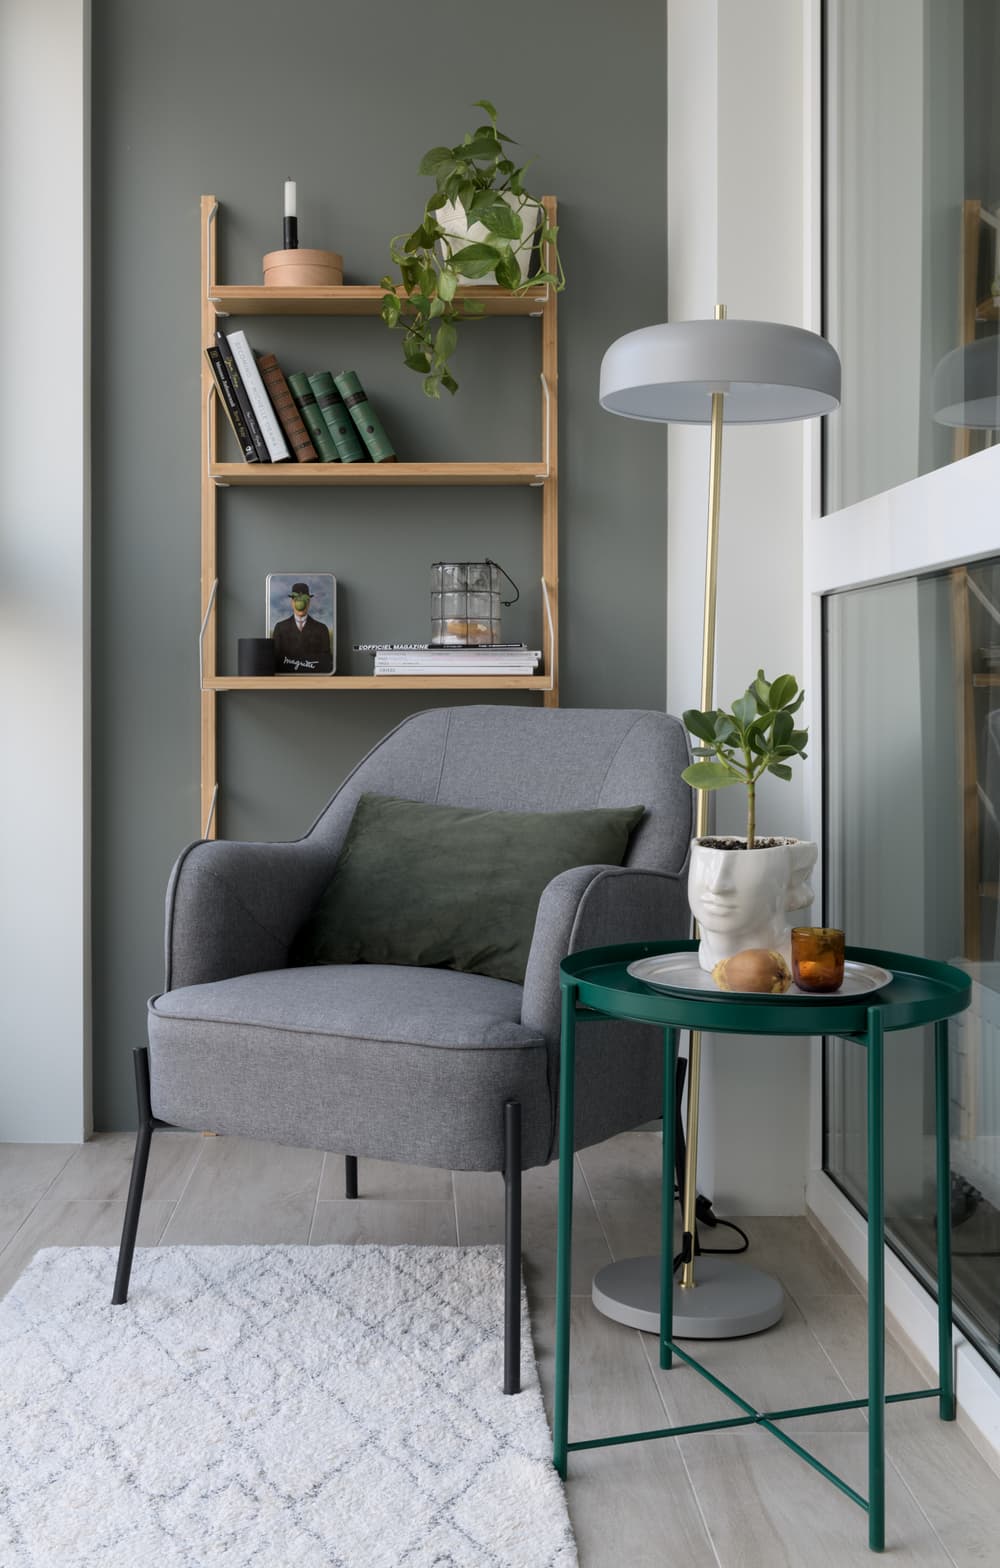 The Olive Shade Apartment in Kyiv, Ukraine